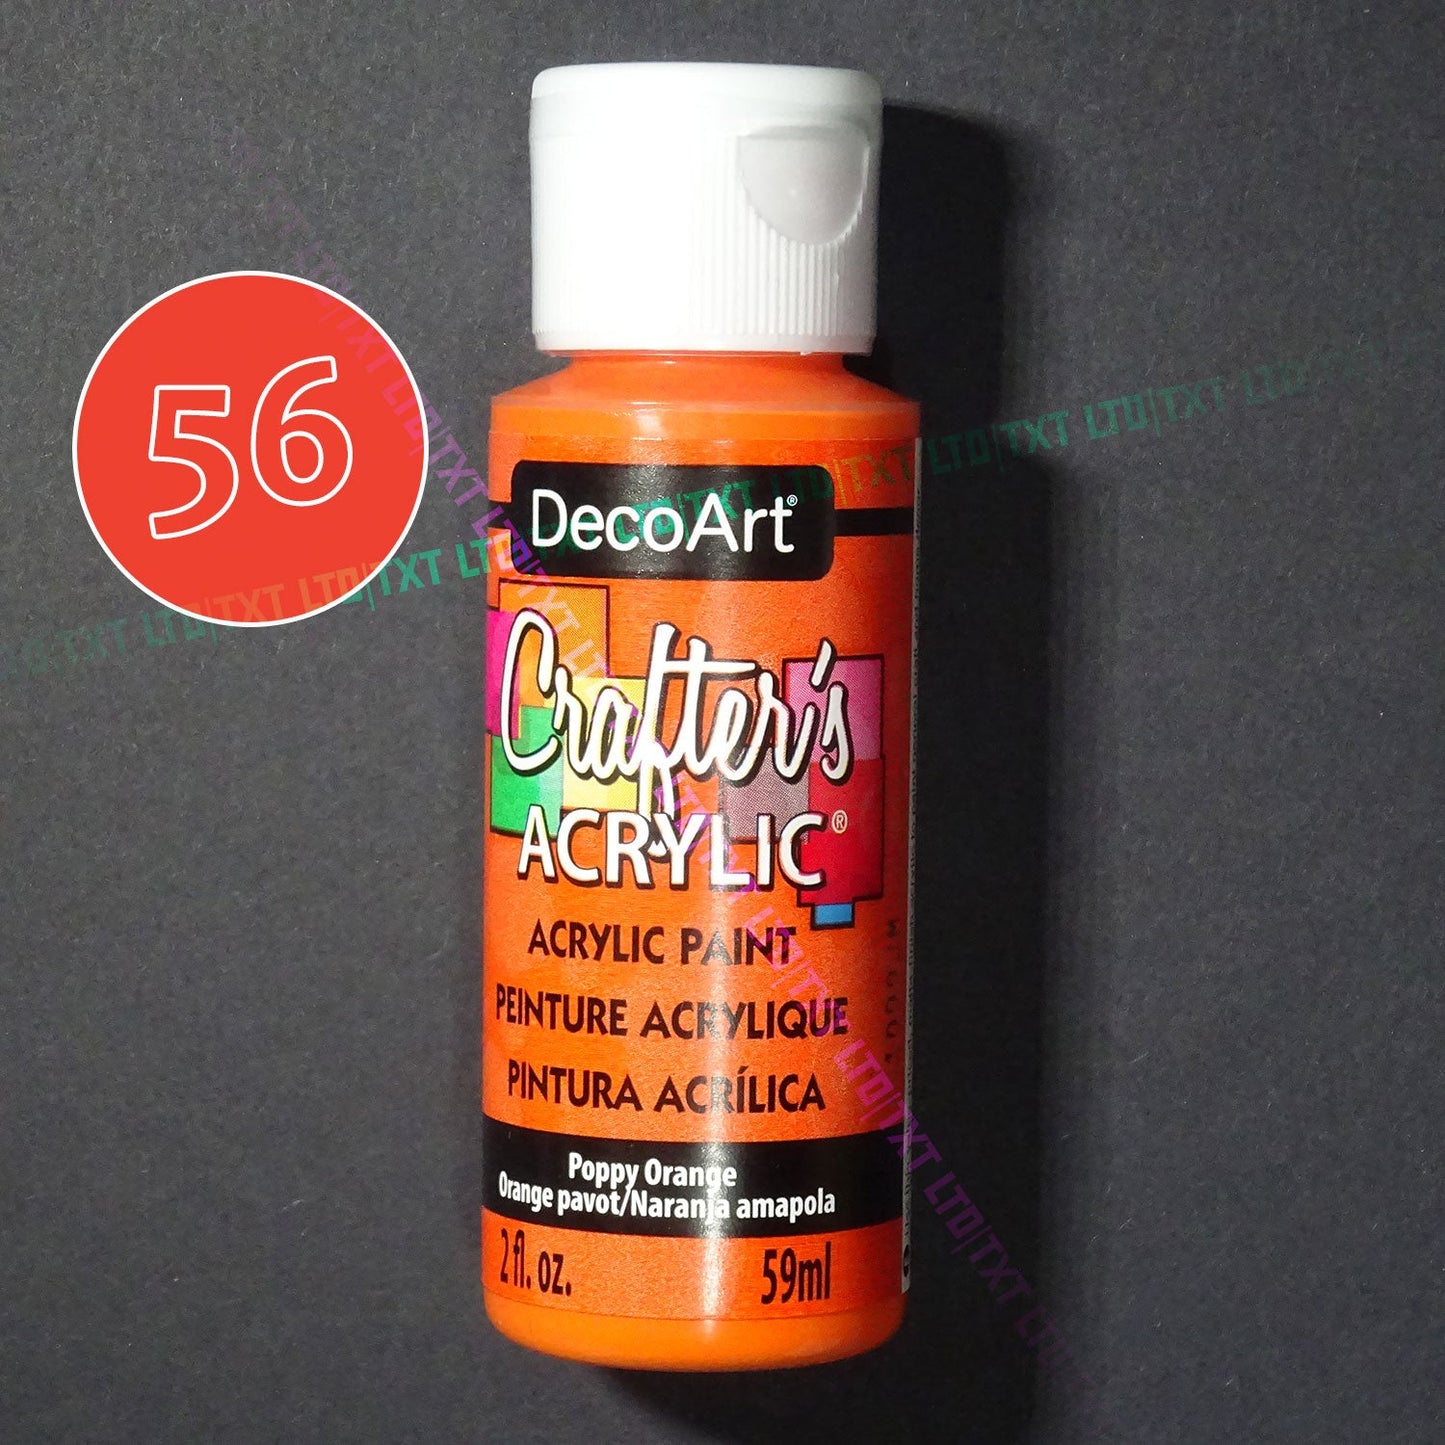 DecoArt Crafters Acryl, 59ml/2oz. [colours 1 to 103]